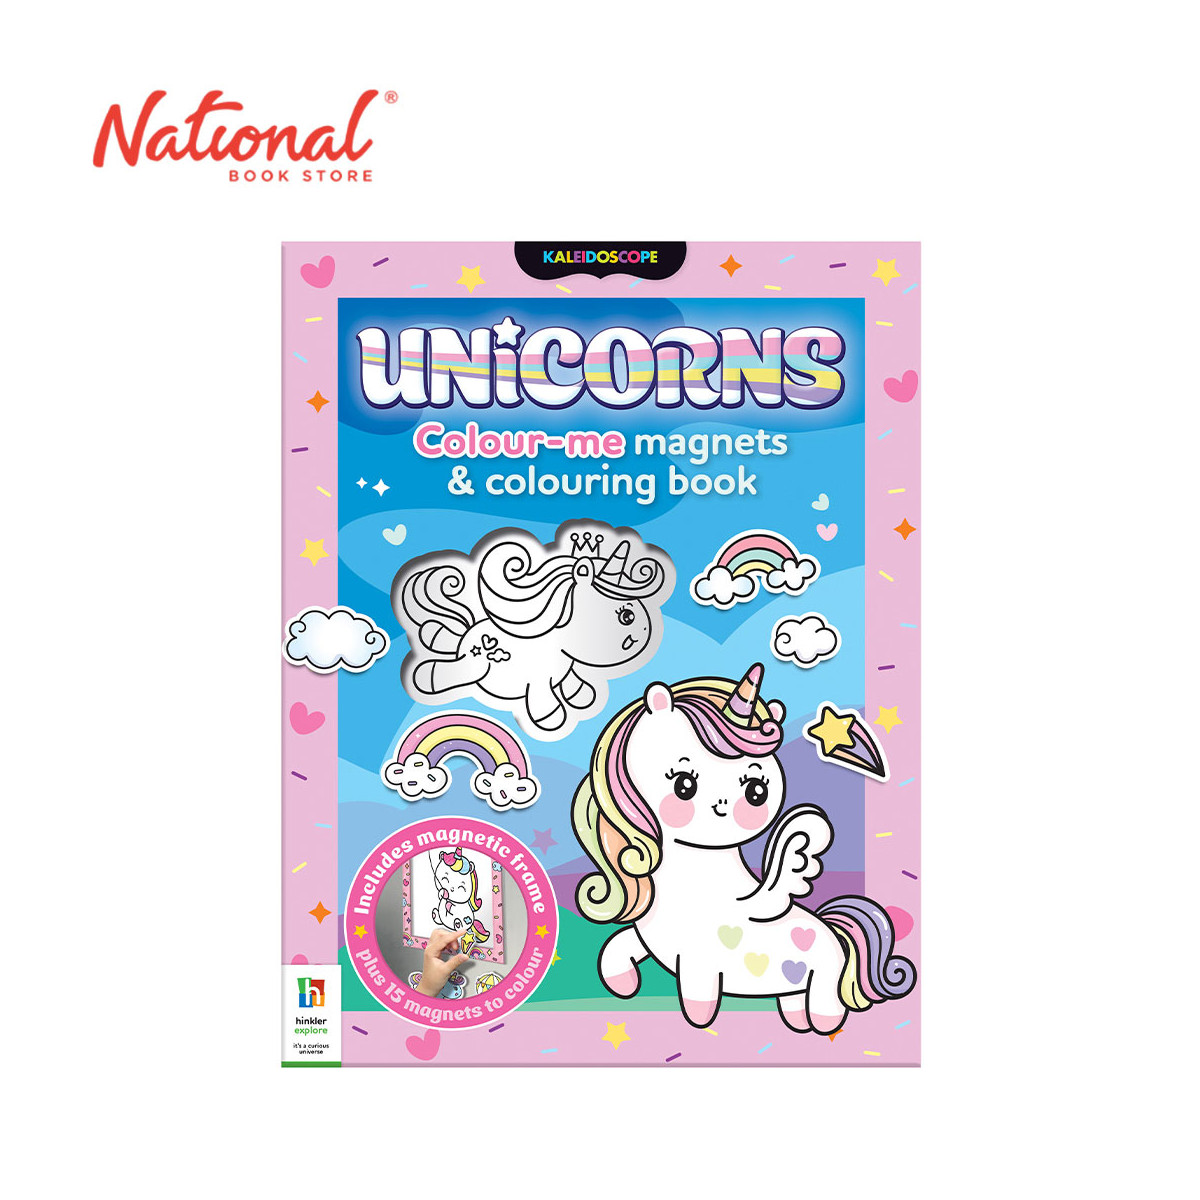 Unicorns Colour-Me Magnets and Colouring Book - Trade Paperback - Activity Books for Kids